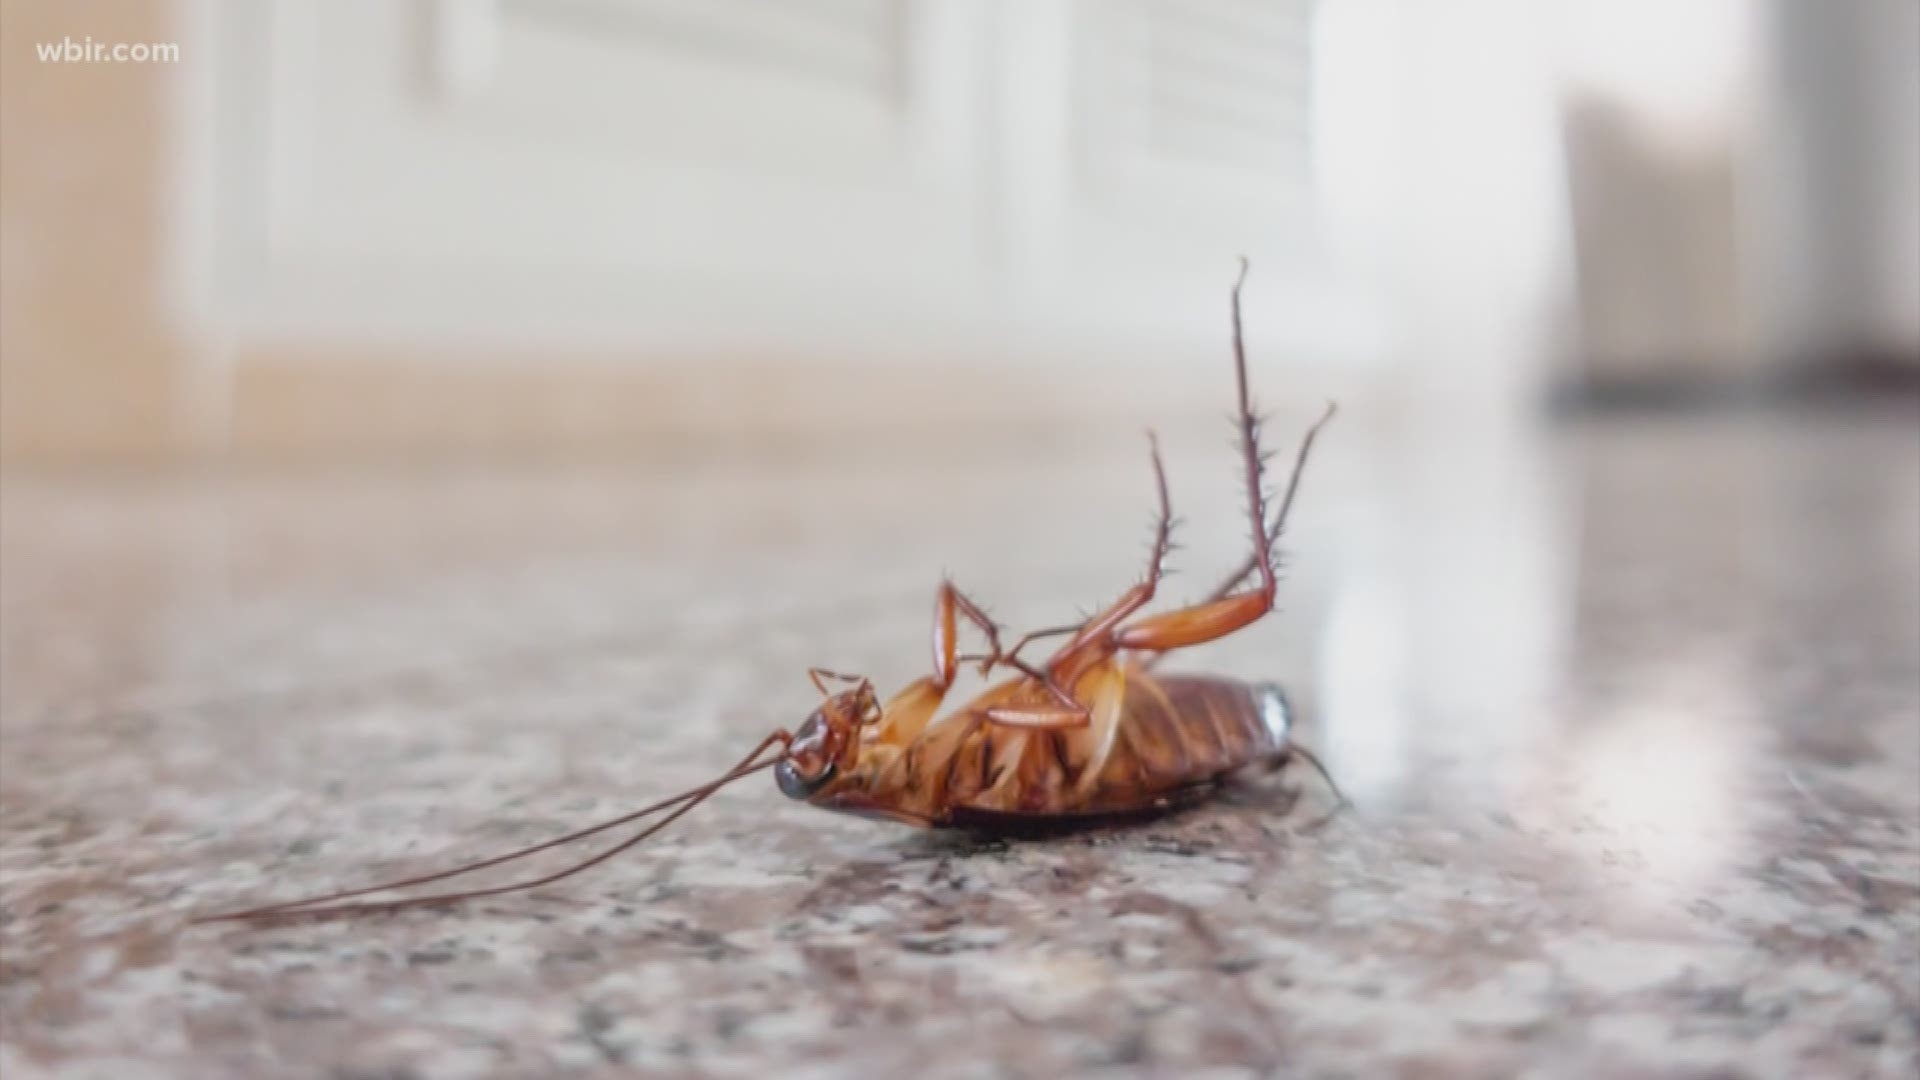 Here's something to make your skin crawl this morning: cockroaches are evolving to become immune to sprays. If you spend more time deciding what to watch than actually watching it - you're not alone. According to a new report from Nielson, millennials spend about nine and a half minutes choosing what to watch on streaming services. And Christmas bells are already ringing at the Hallmark Channel. They're looking for amateur bakers for a new cooking competition.